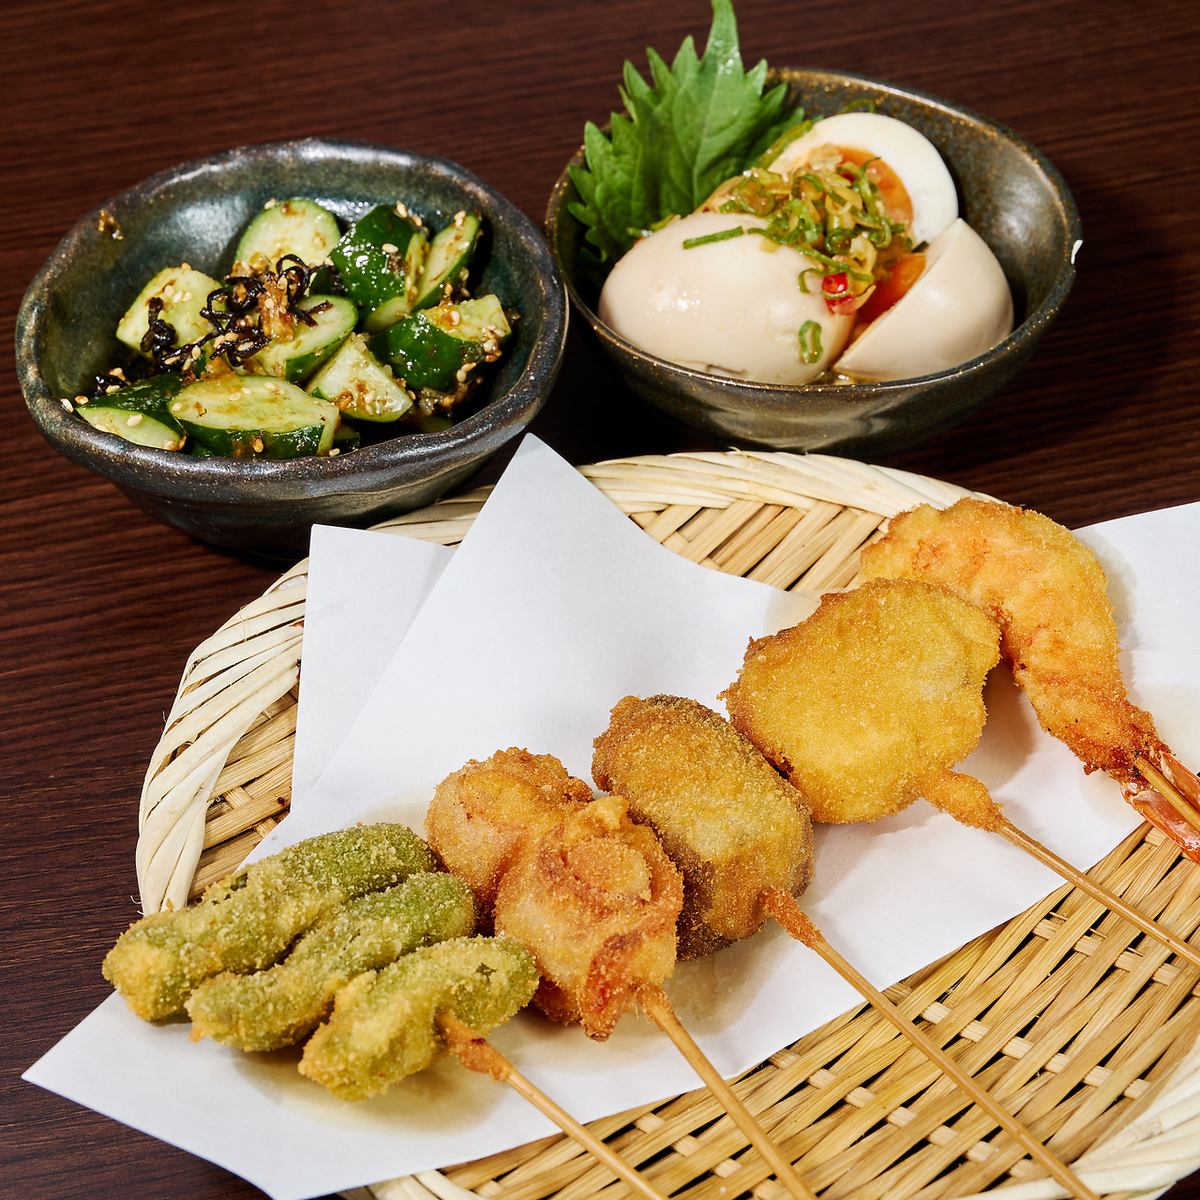 A shop loved by men and women of all ages, with Osaka's specialty "Kushikatsu" as the main character! The bar is open from 24:00!